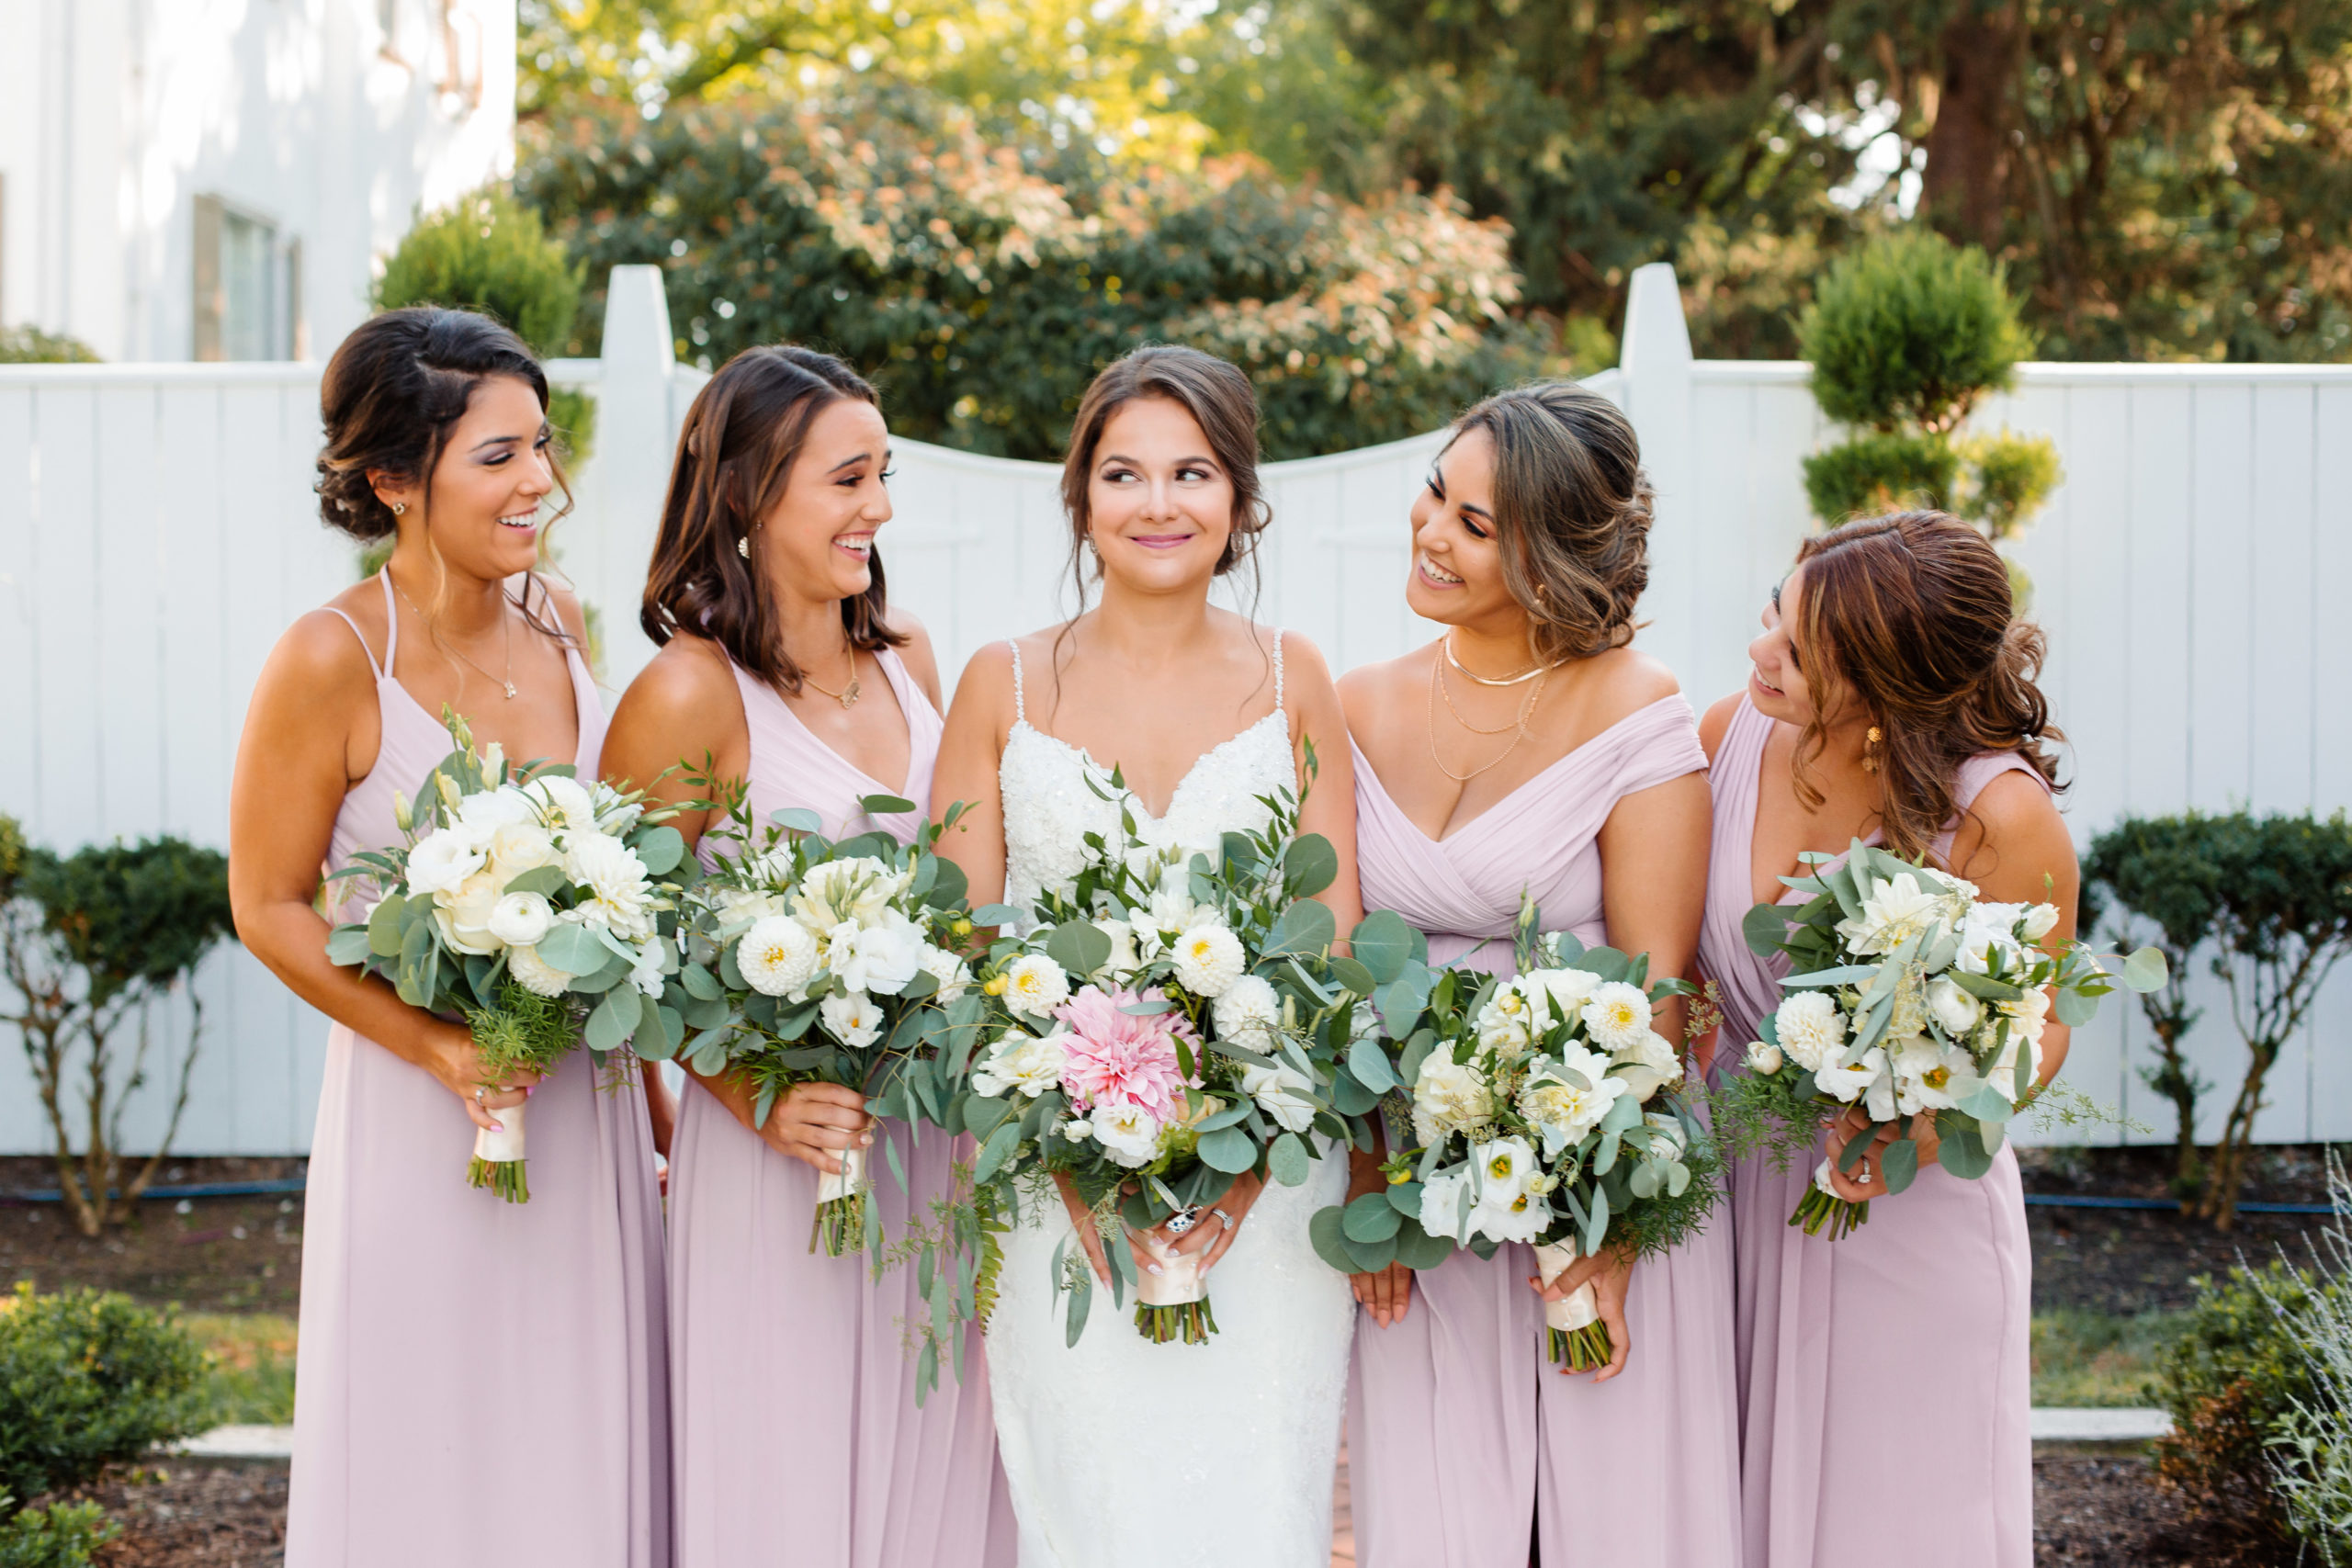 bride holding bouquet with bridesmaids standing next to her